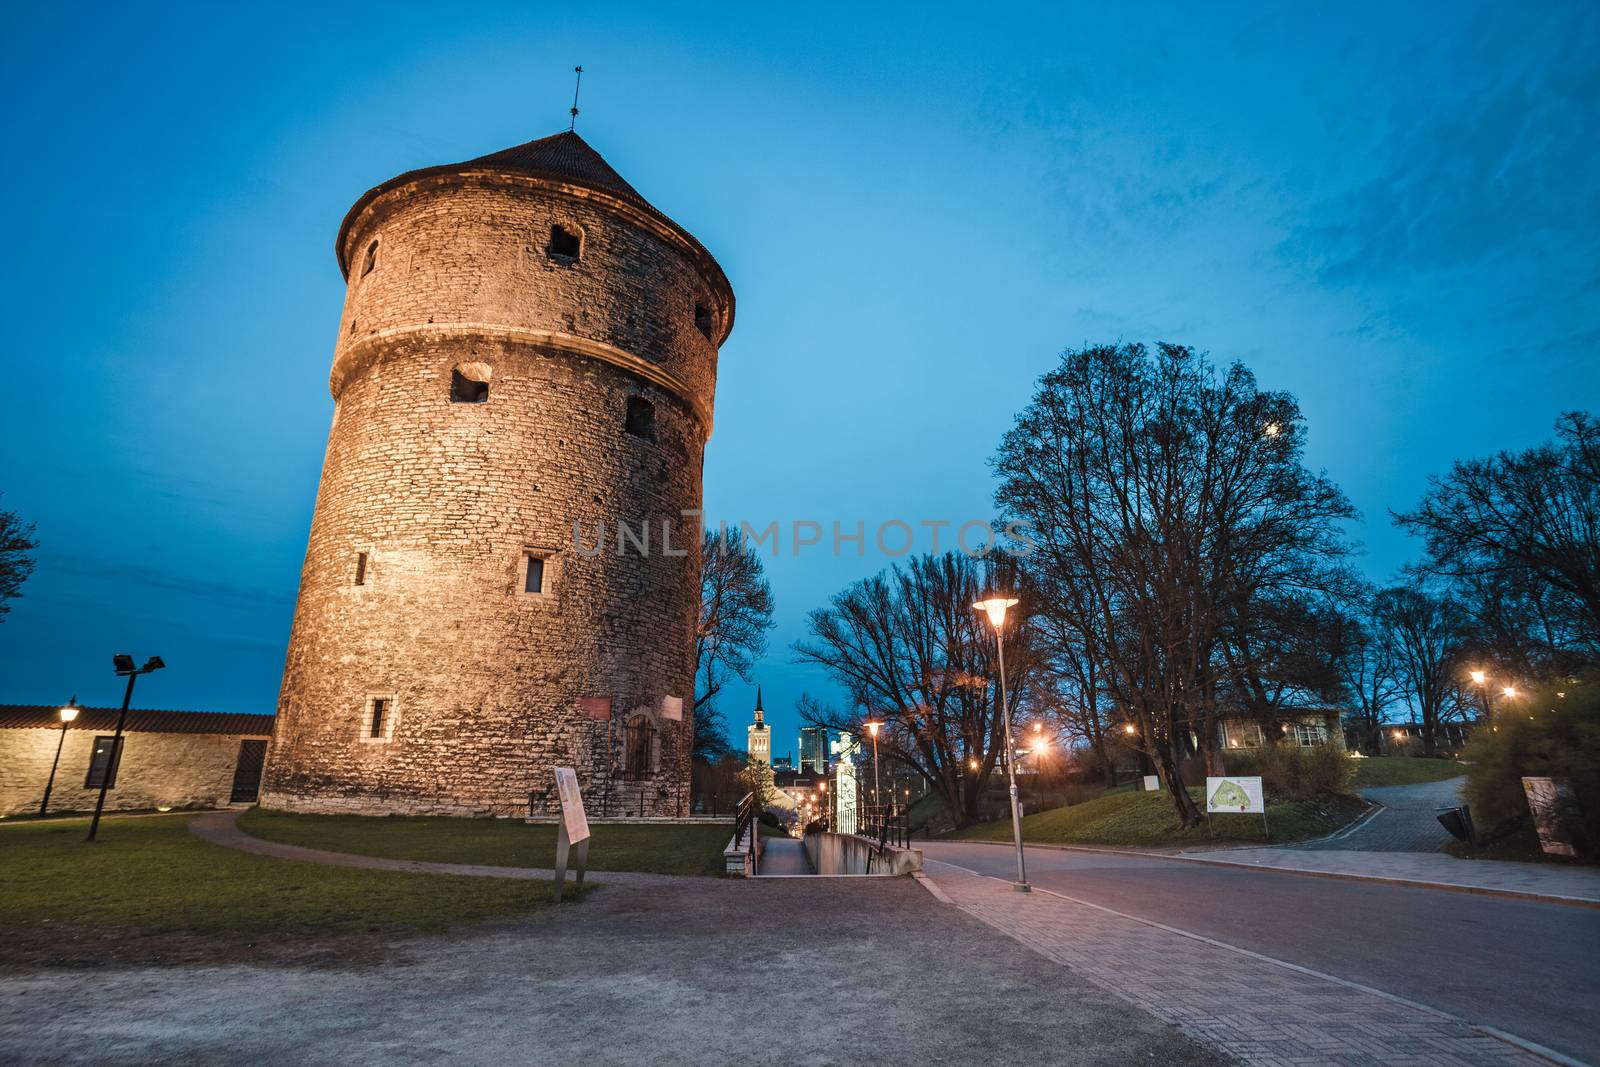 Tallinn Old Town Medieval towers - part of the city defensive wall, Estonia.